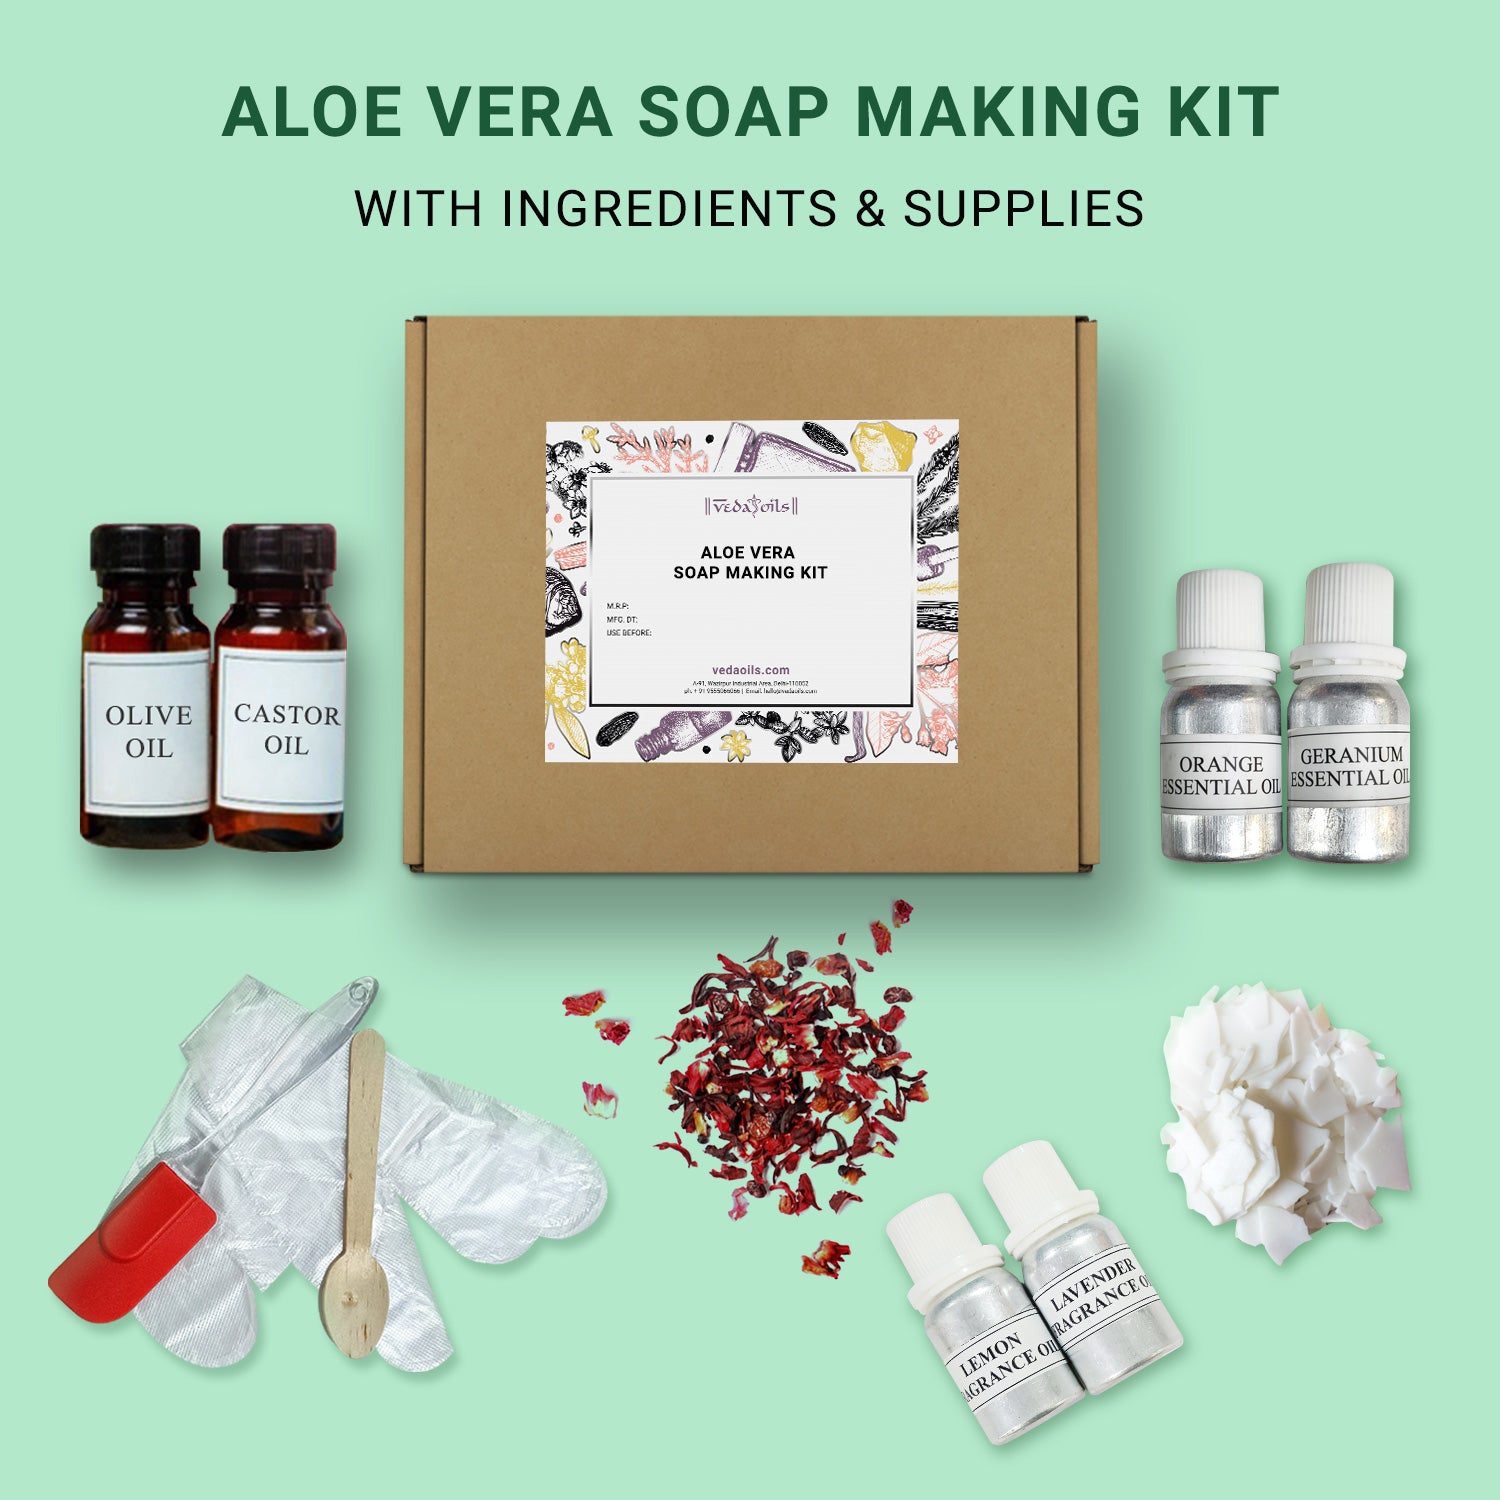 VedaOils Launches Soap Making Kit - Now Make Designer Soaps